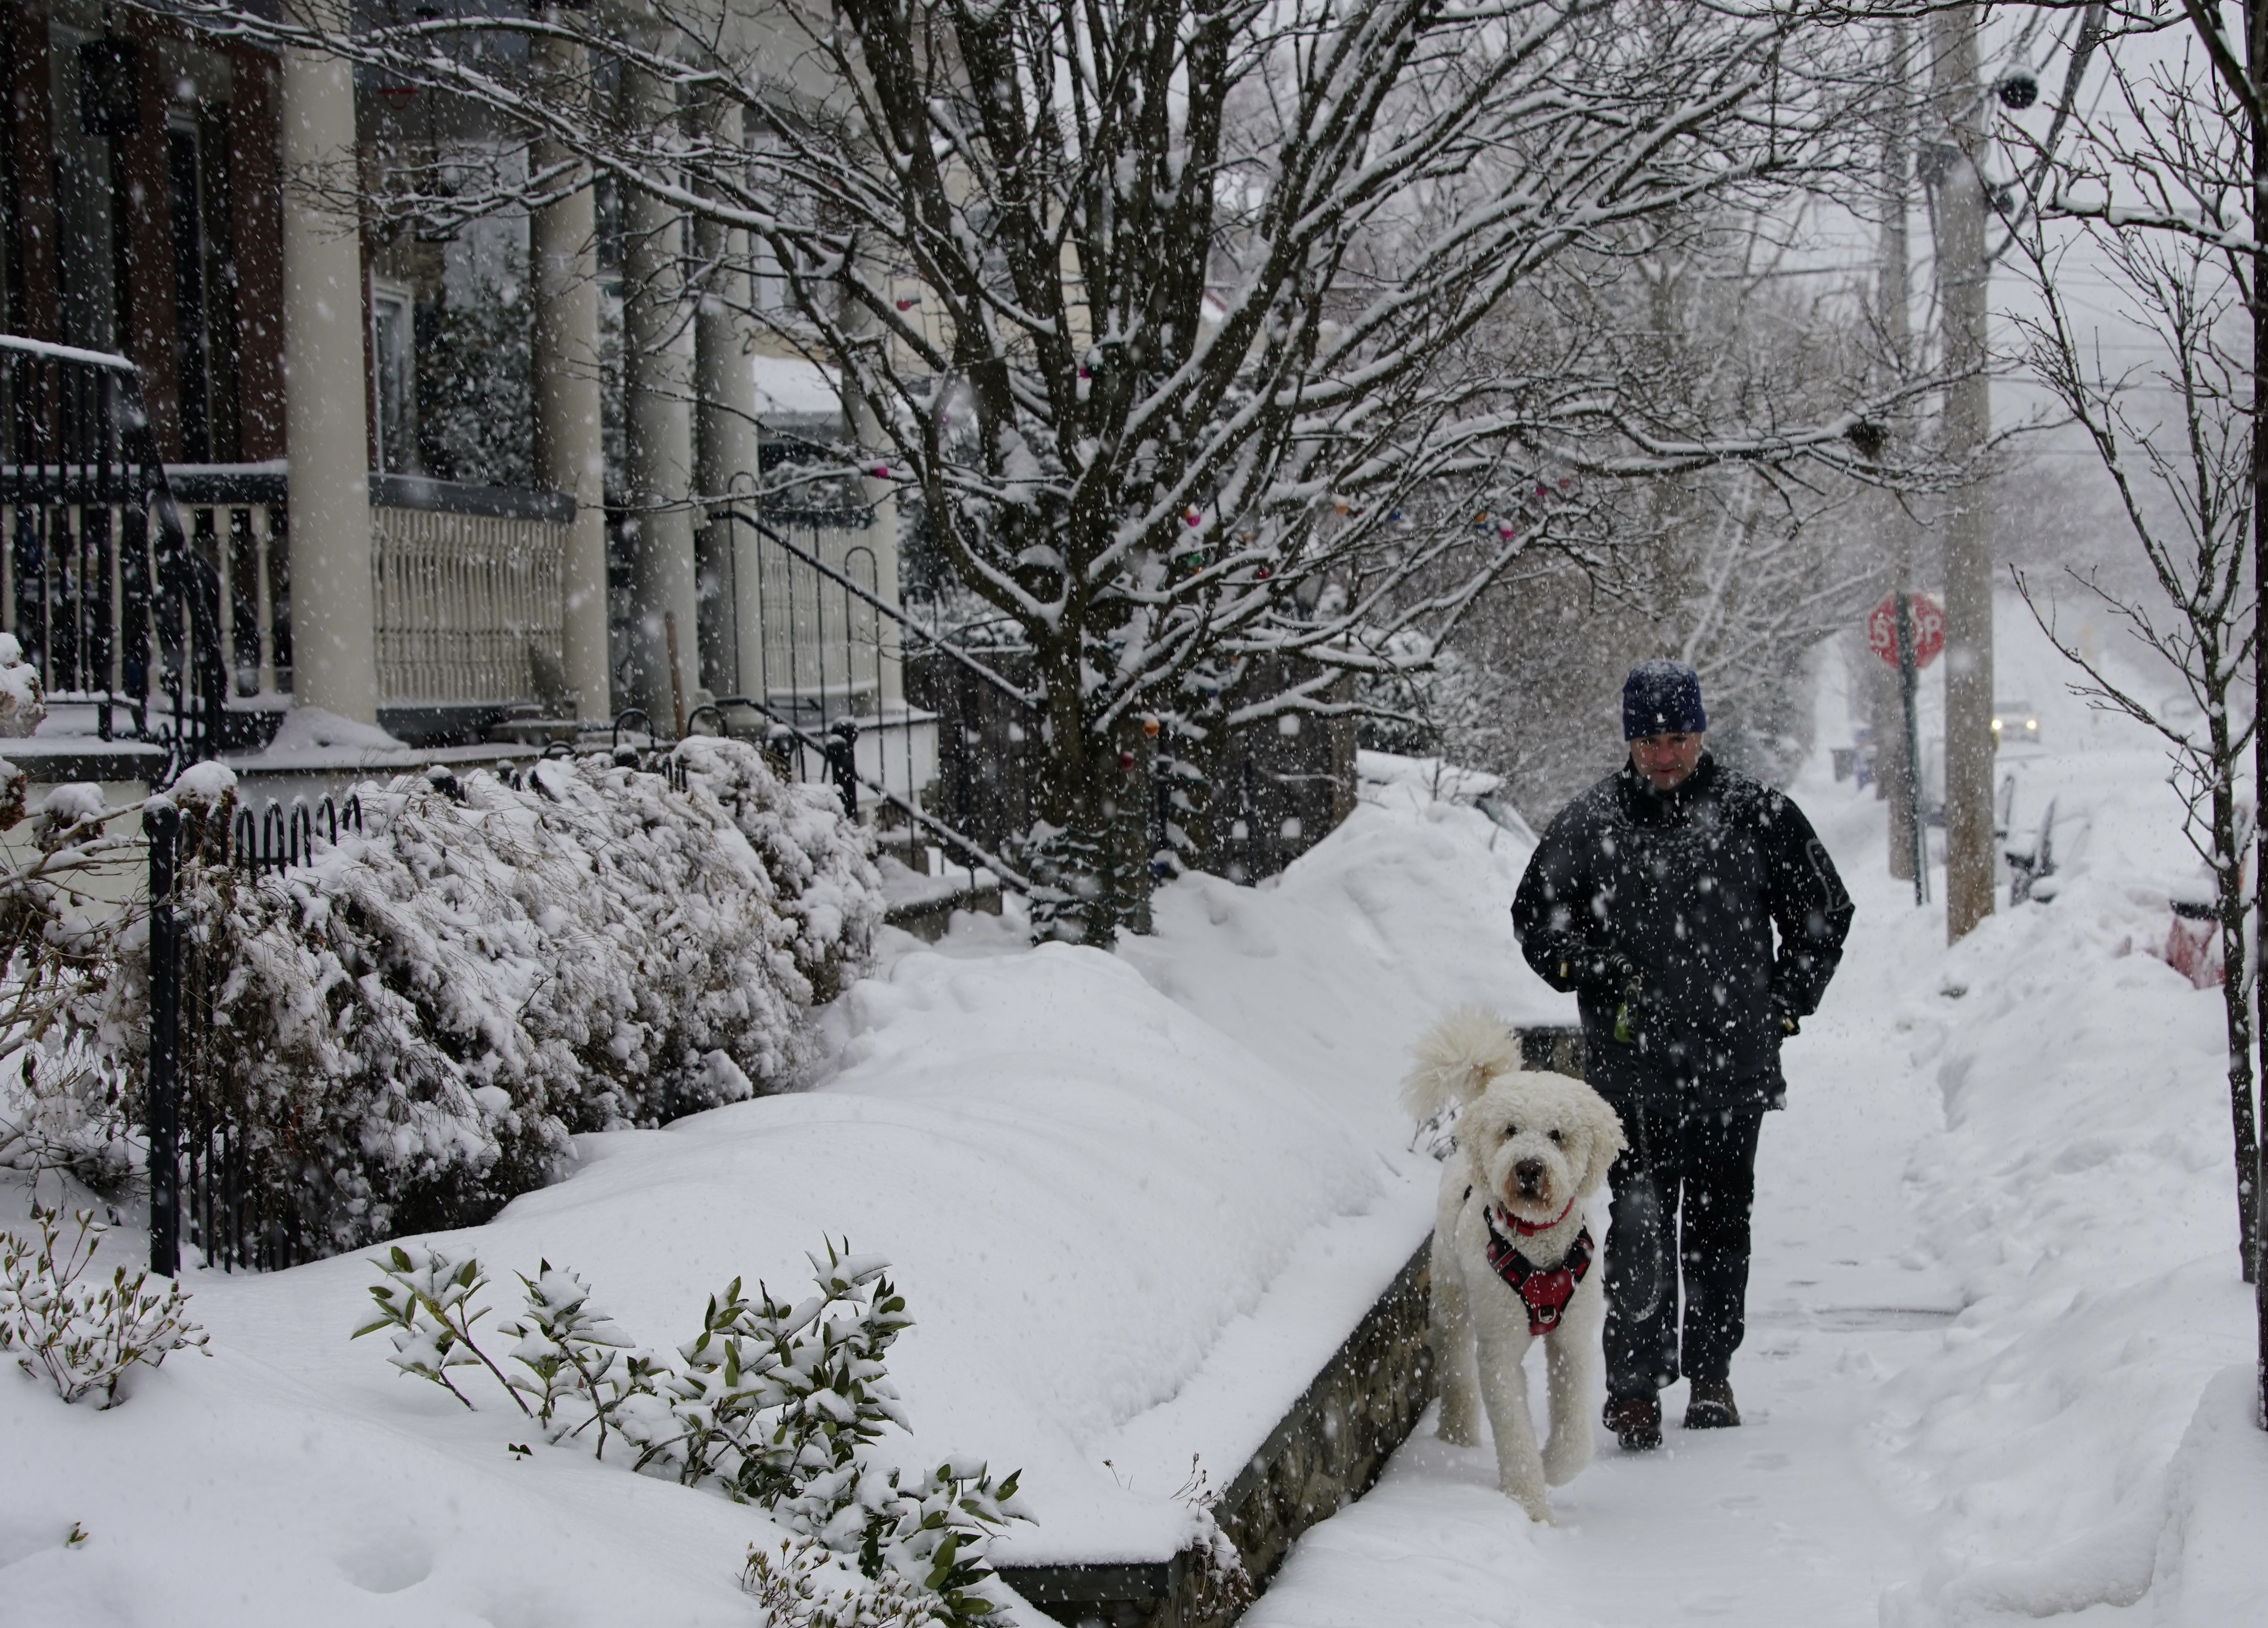 The 2021-22 winter forecasts are in. What they say for snow, cold